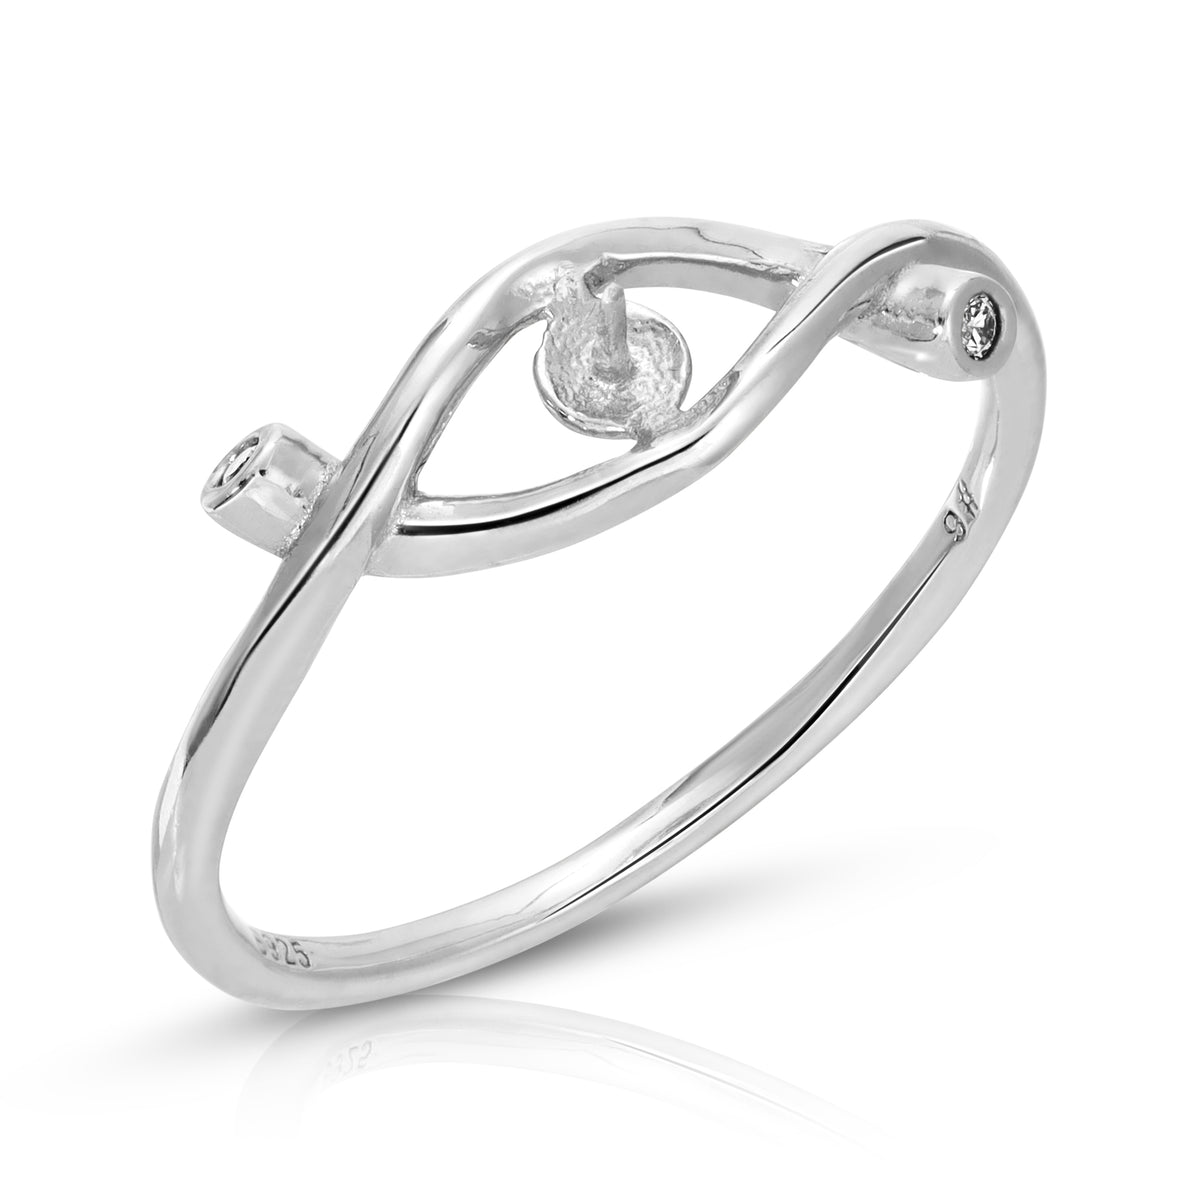 Sterling Silver Knot Design Pearl Ring Setting